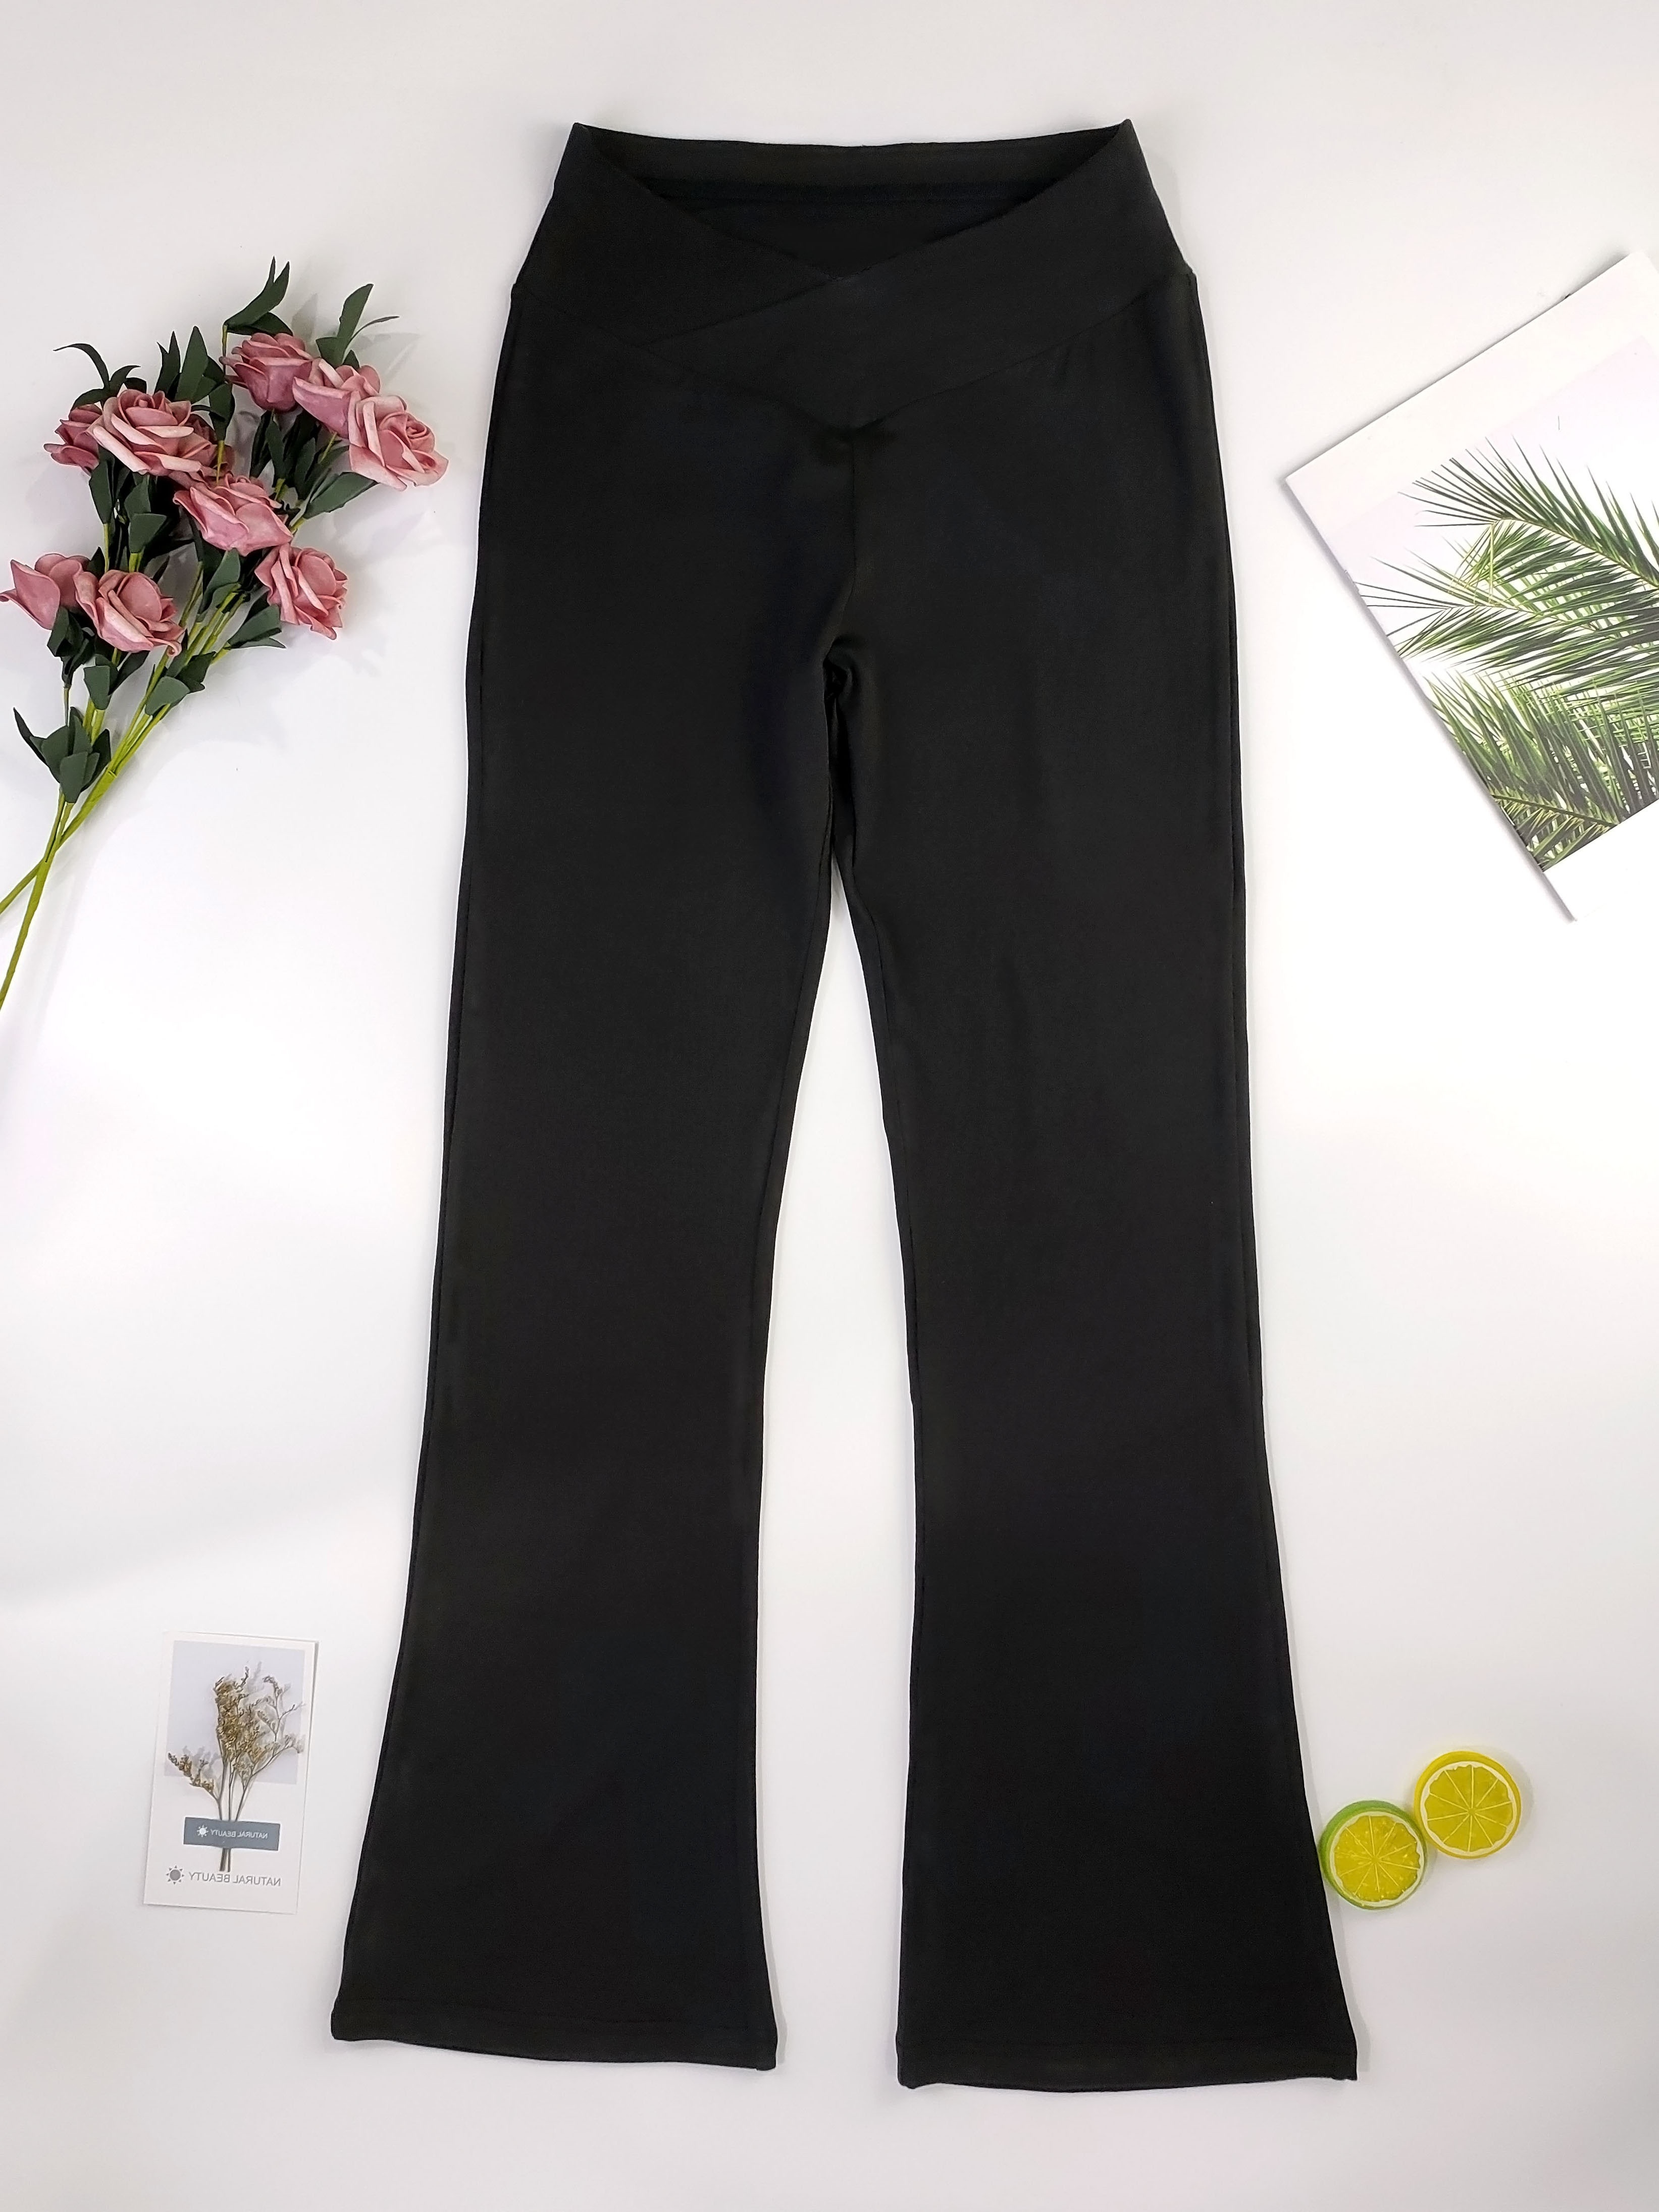 solid flare leg pants casual stretchy high waist pants womens clothing